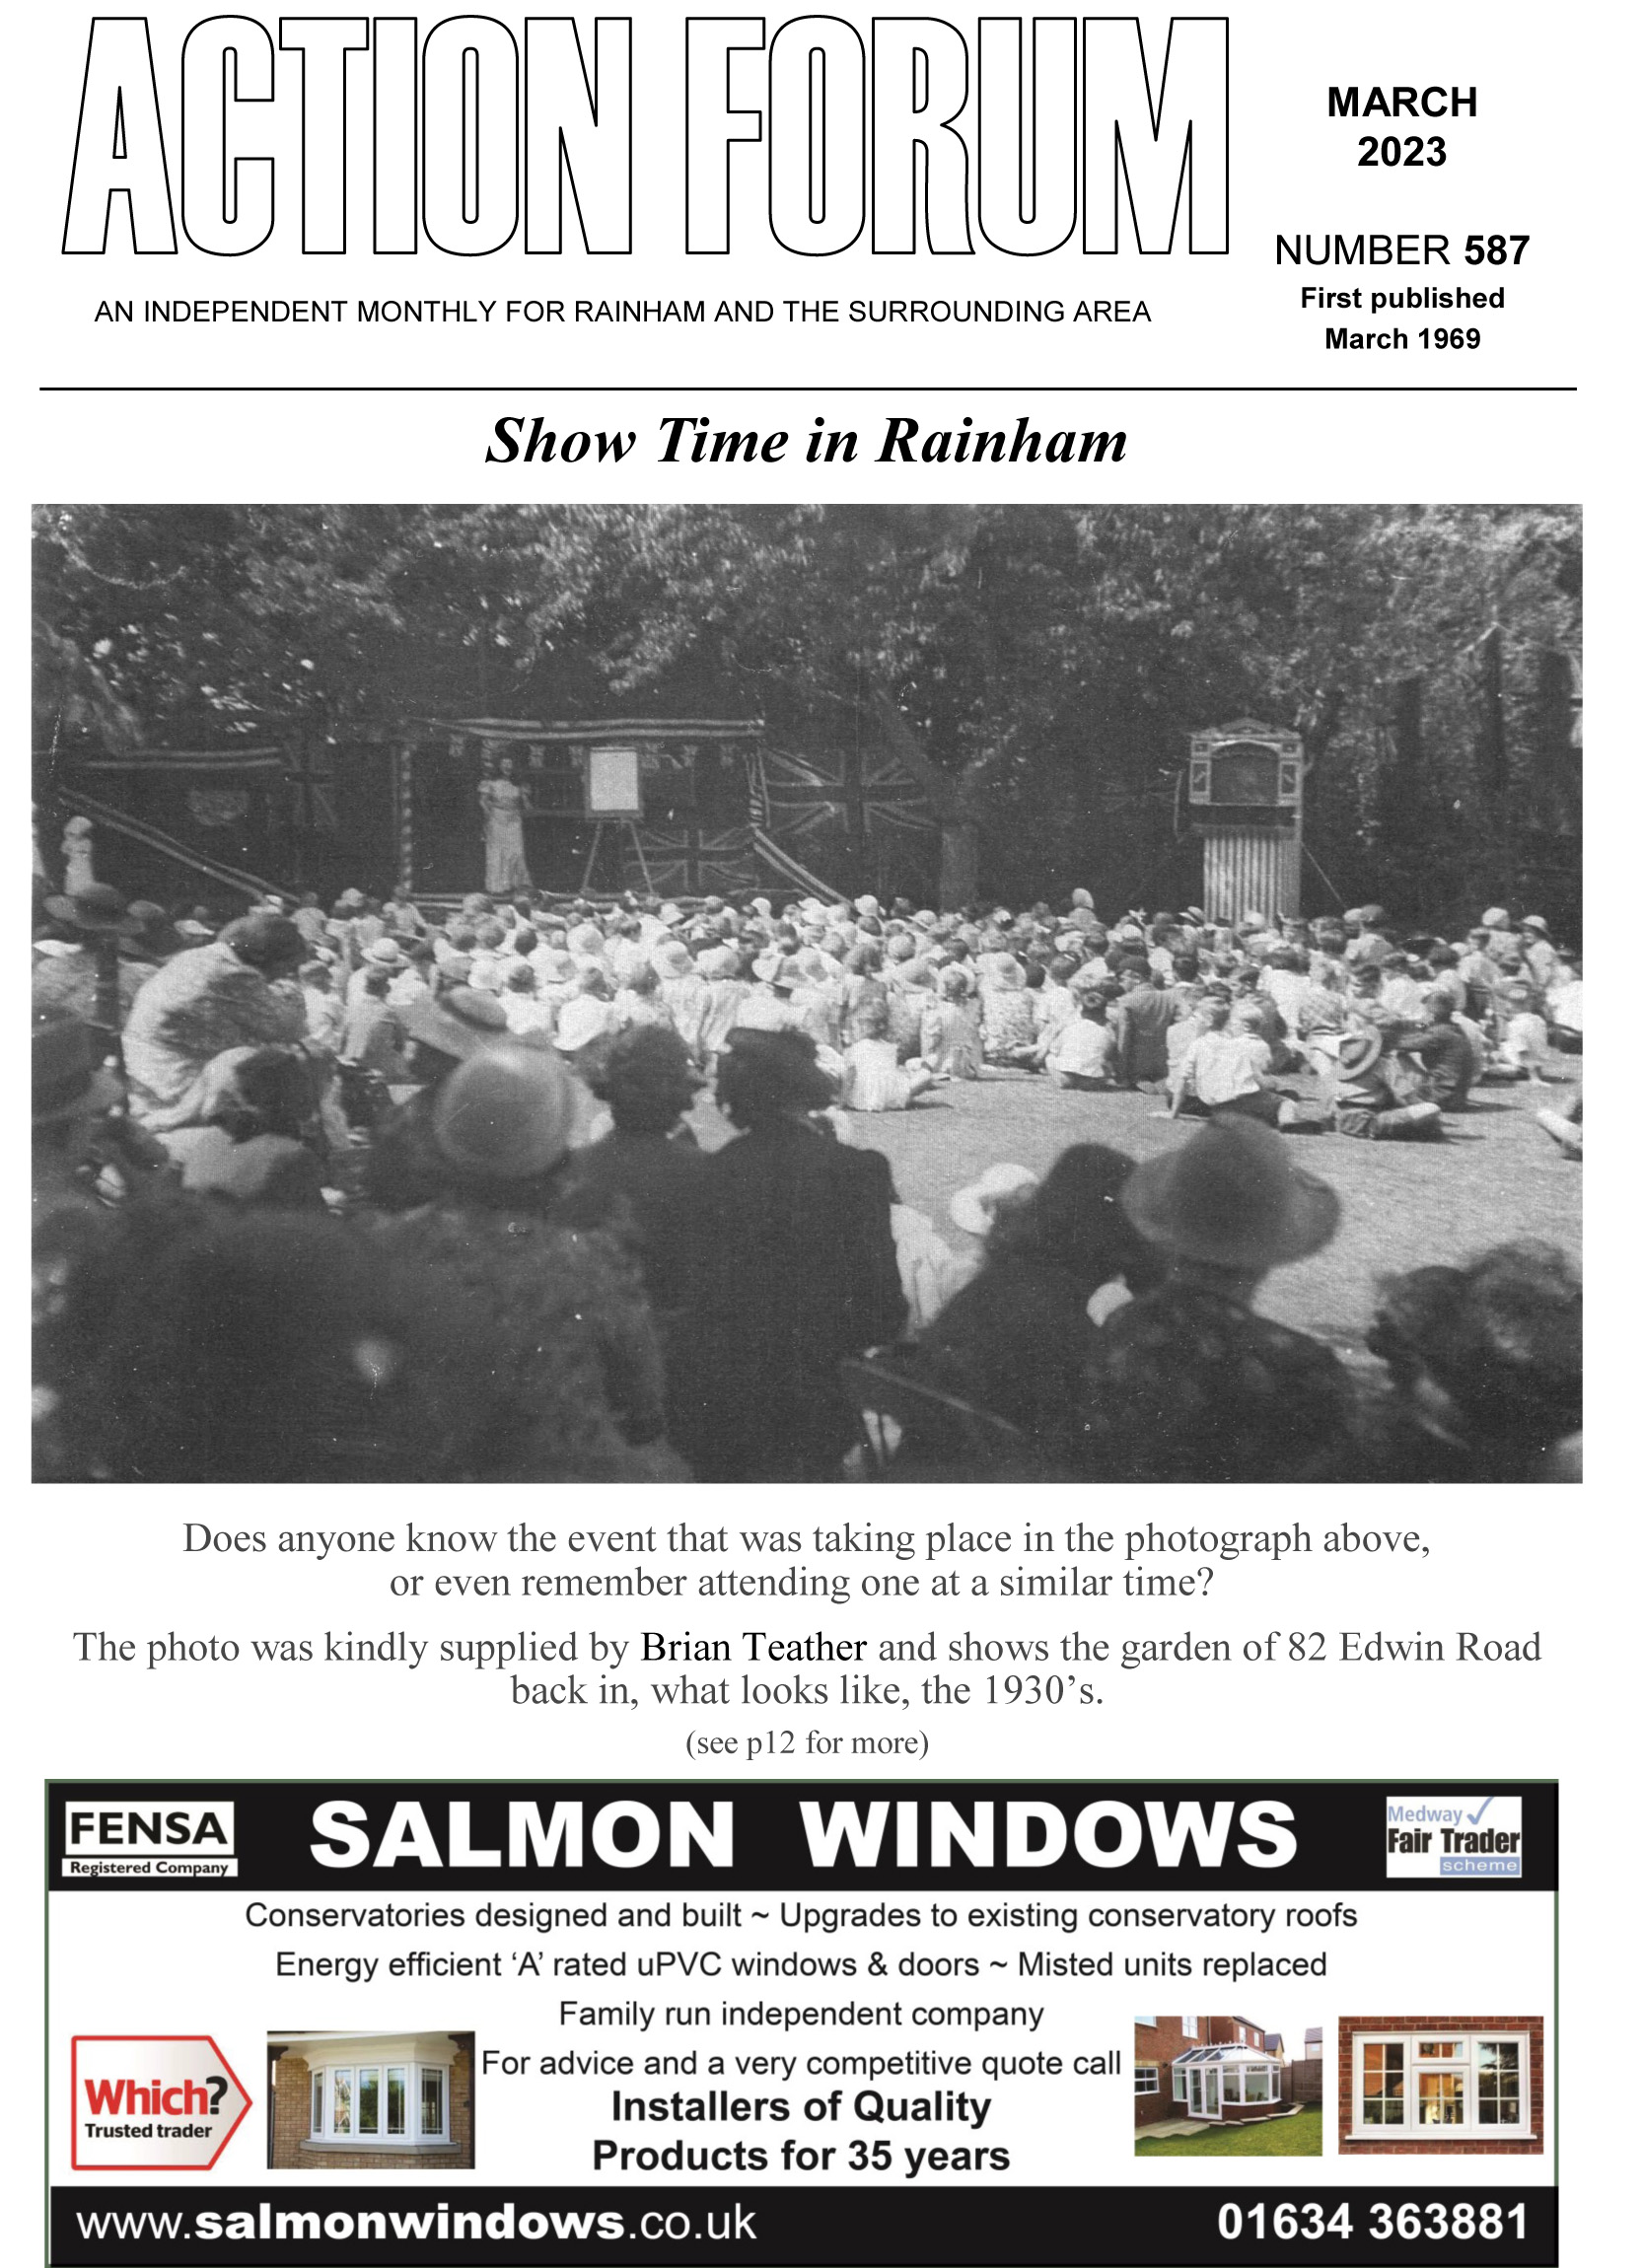 Action Forum magazine number 587 , Cover picture is of an event in the garden of 82 Edwin Road in the 1930s - Can you identify it?